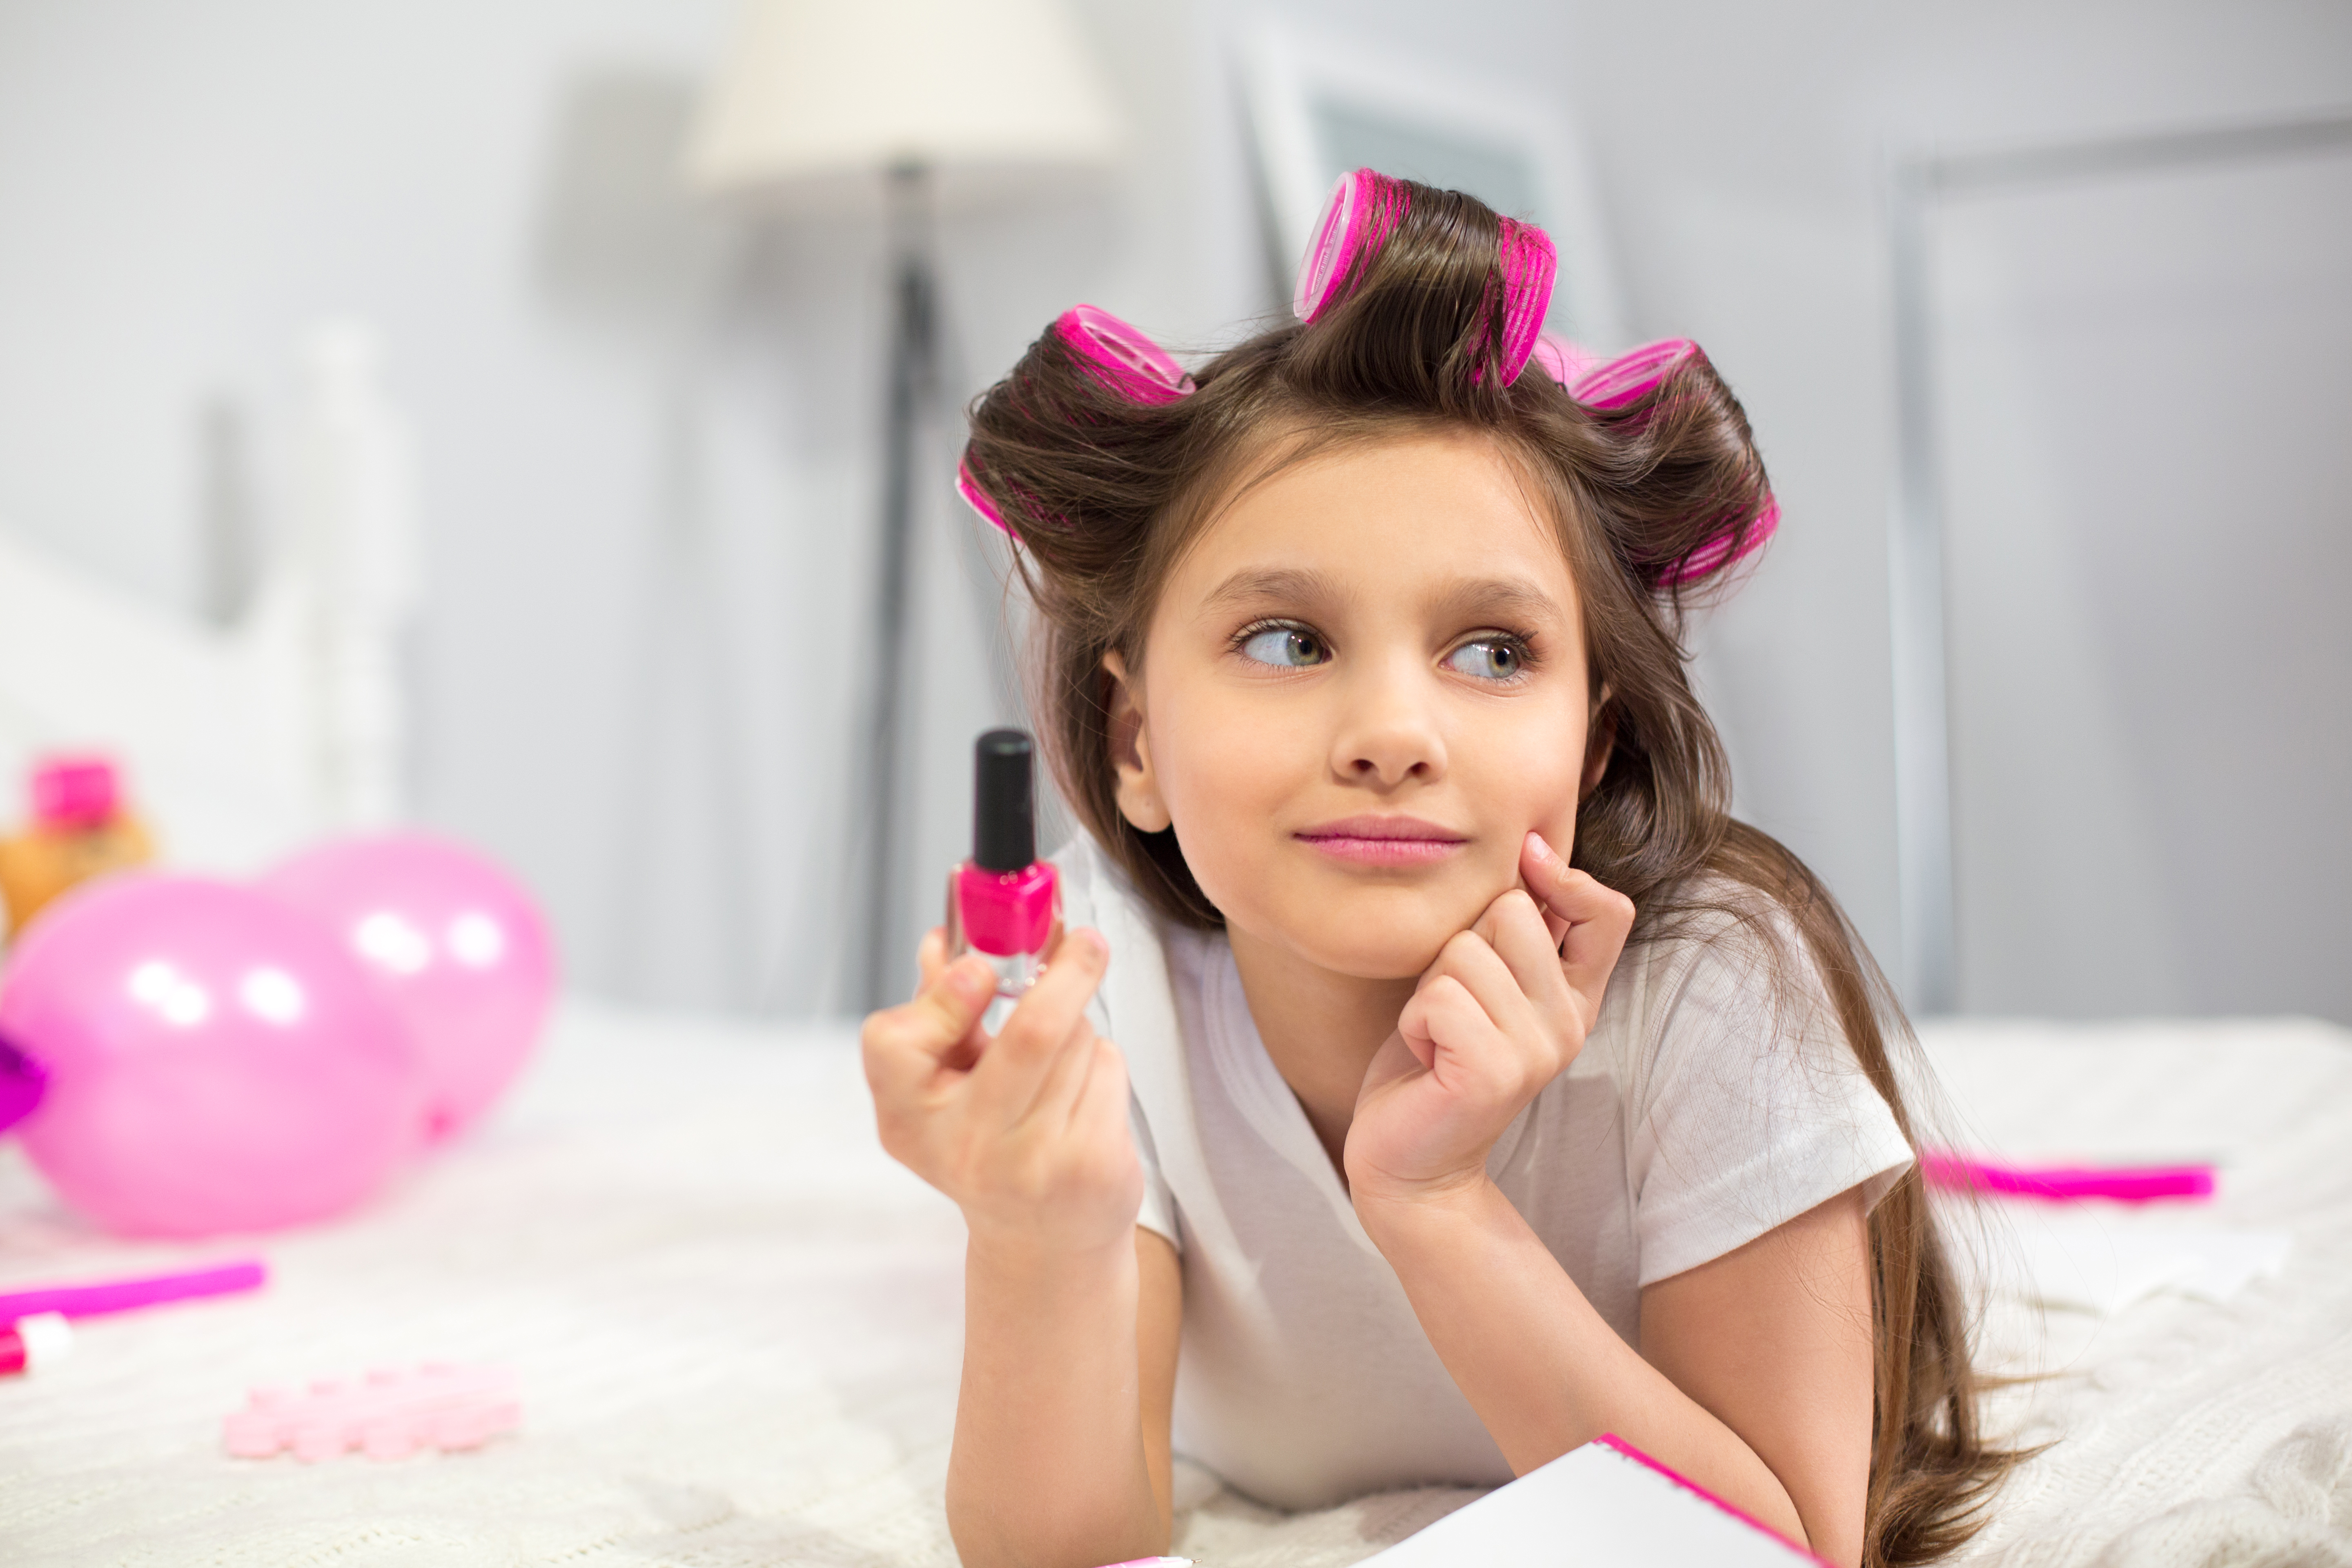 Cute preschooler laying on white blanket holding nail polish. Lovely looking girlie with hair rollers looking at side holding bottle of pink nail polish in her hand.